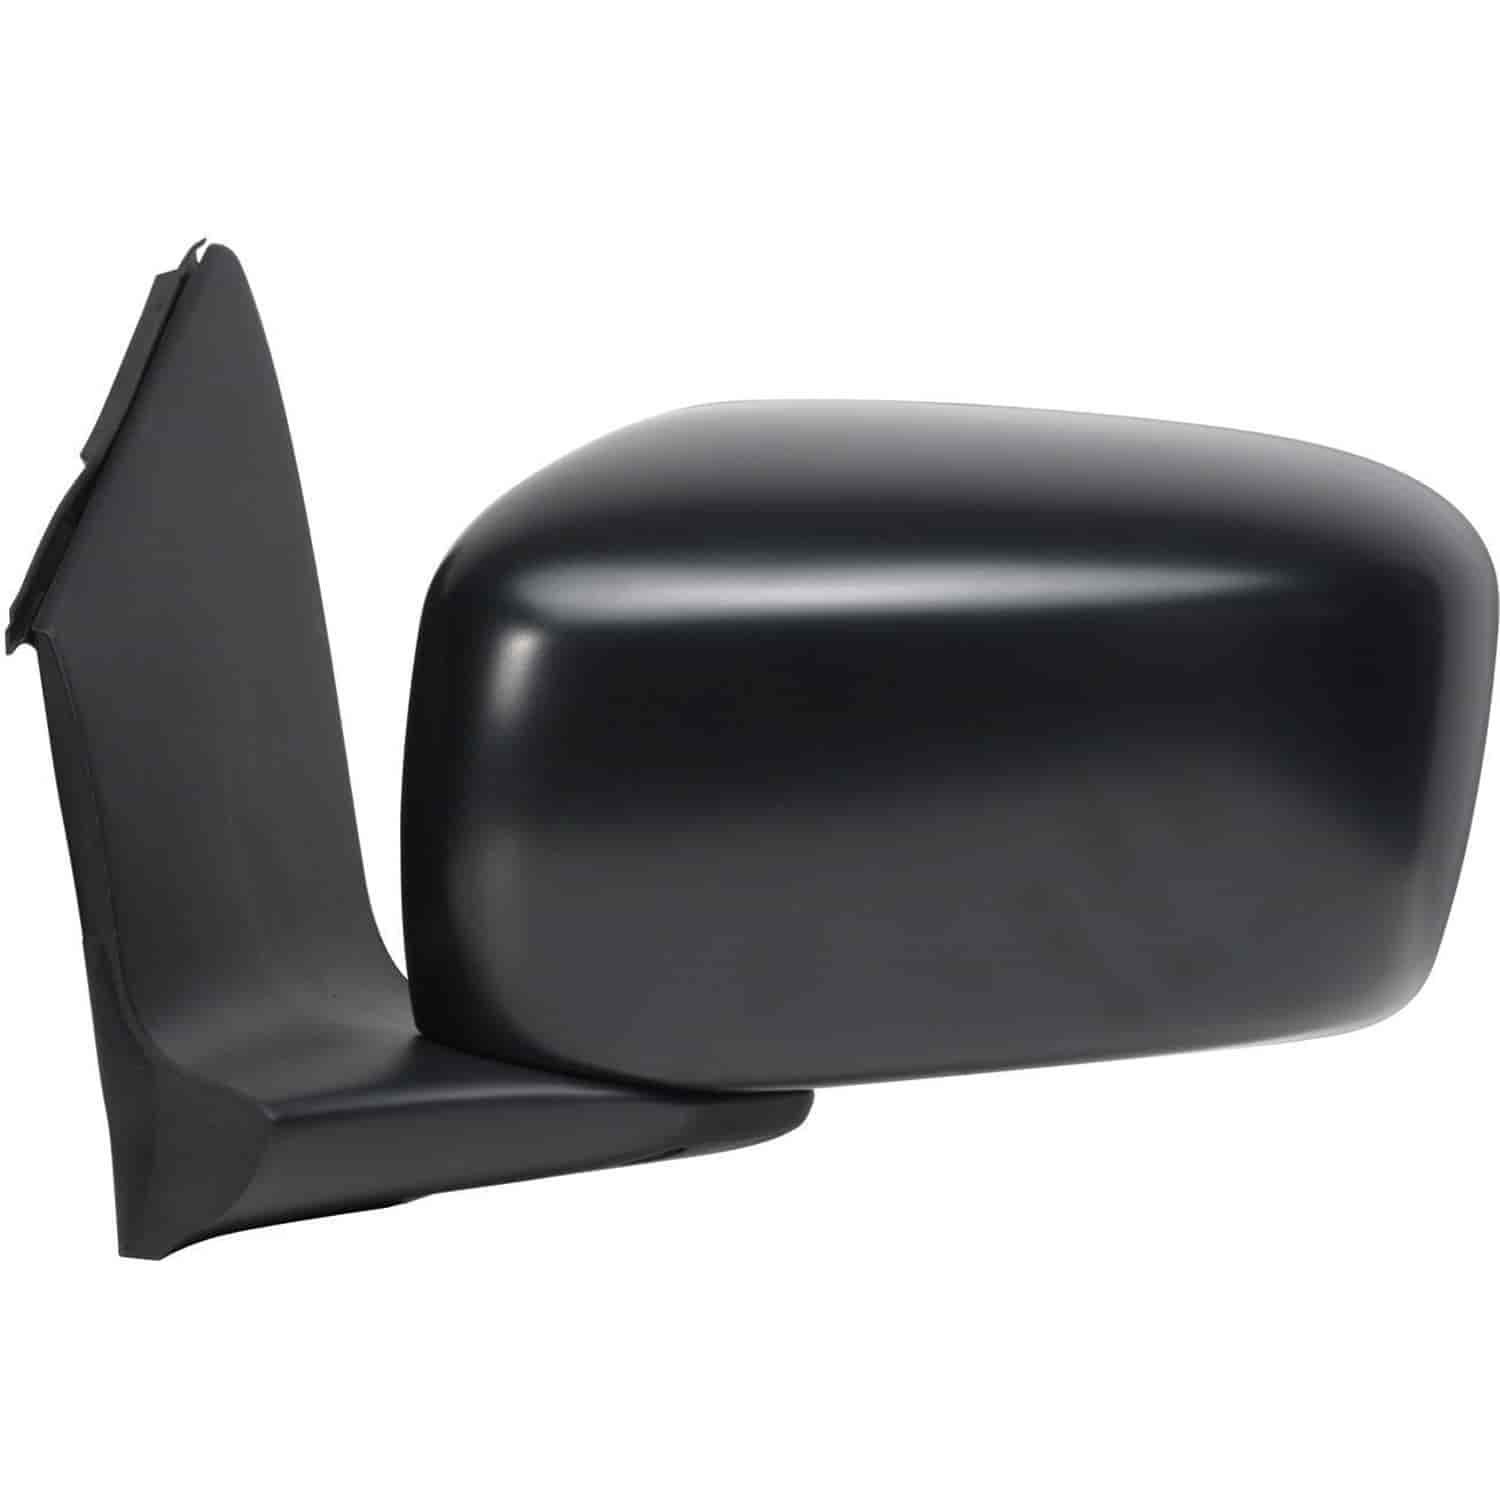 OEM Style Replacement mirror for 05-10 Honda Odyssey driver side mirror tested to fit and function l